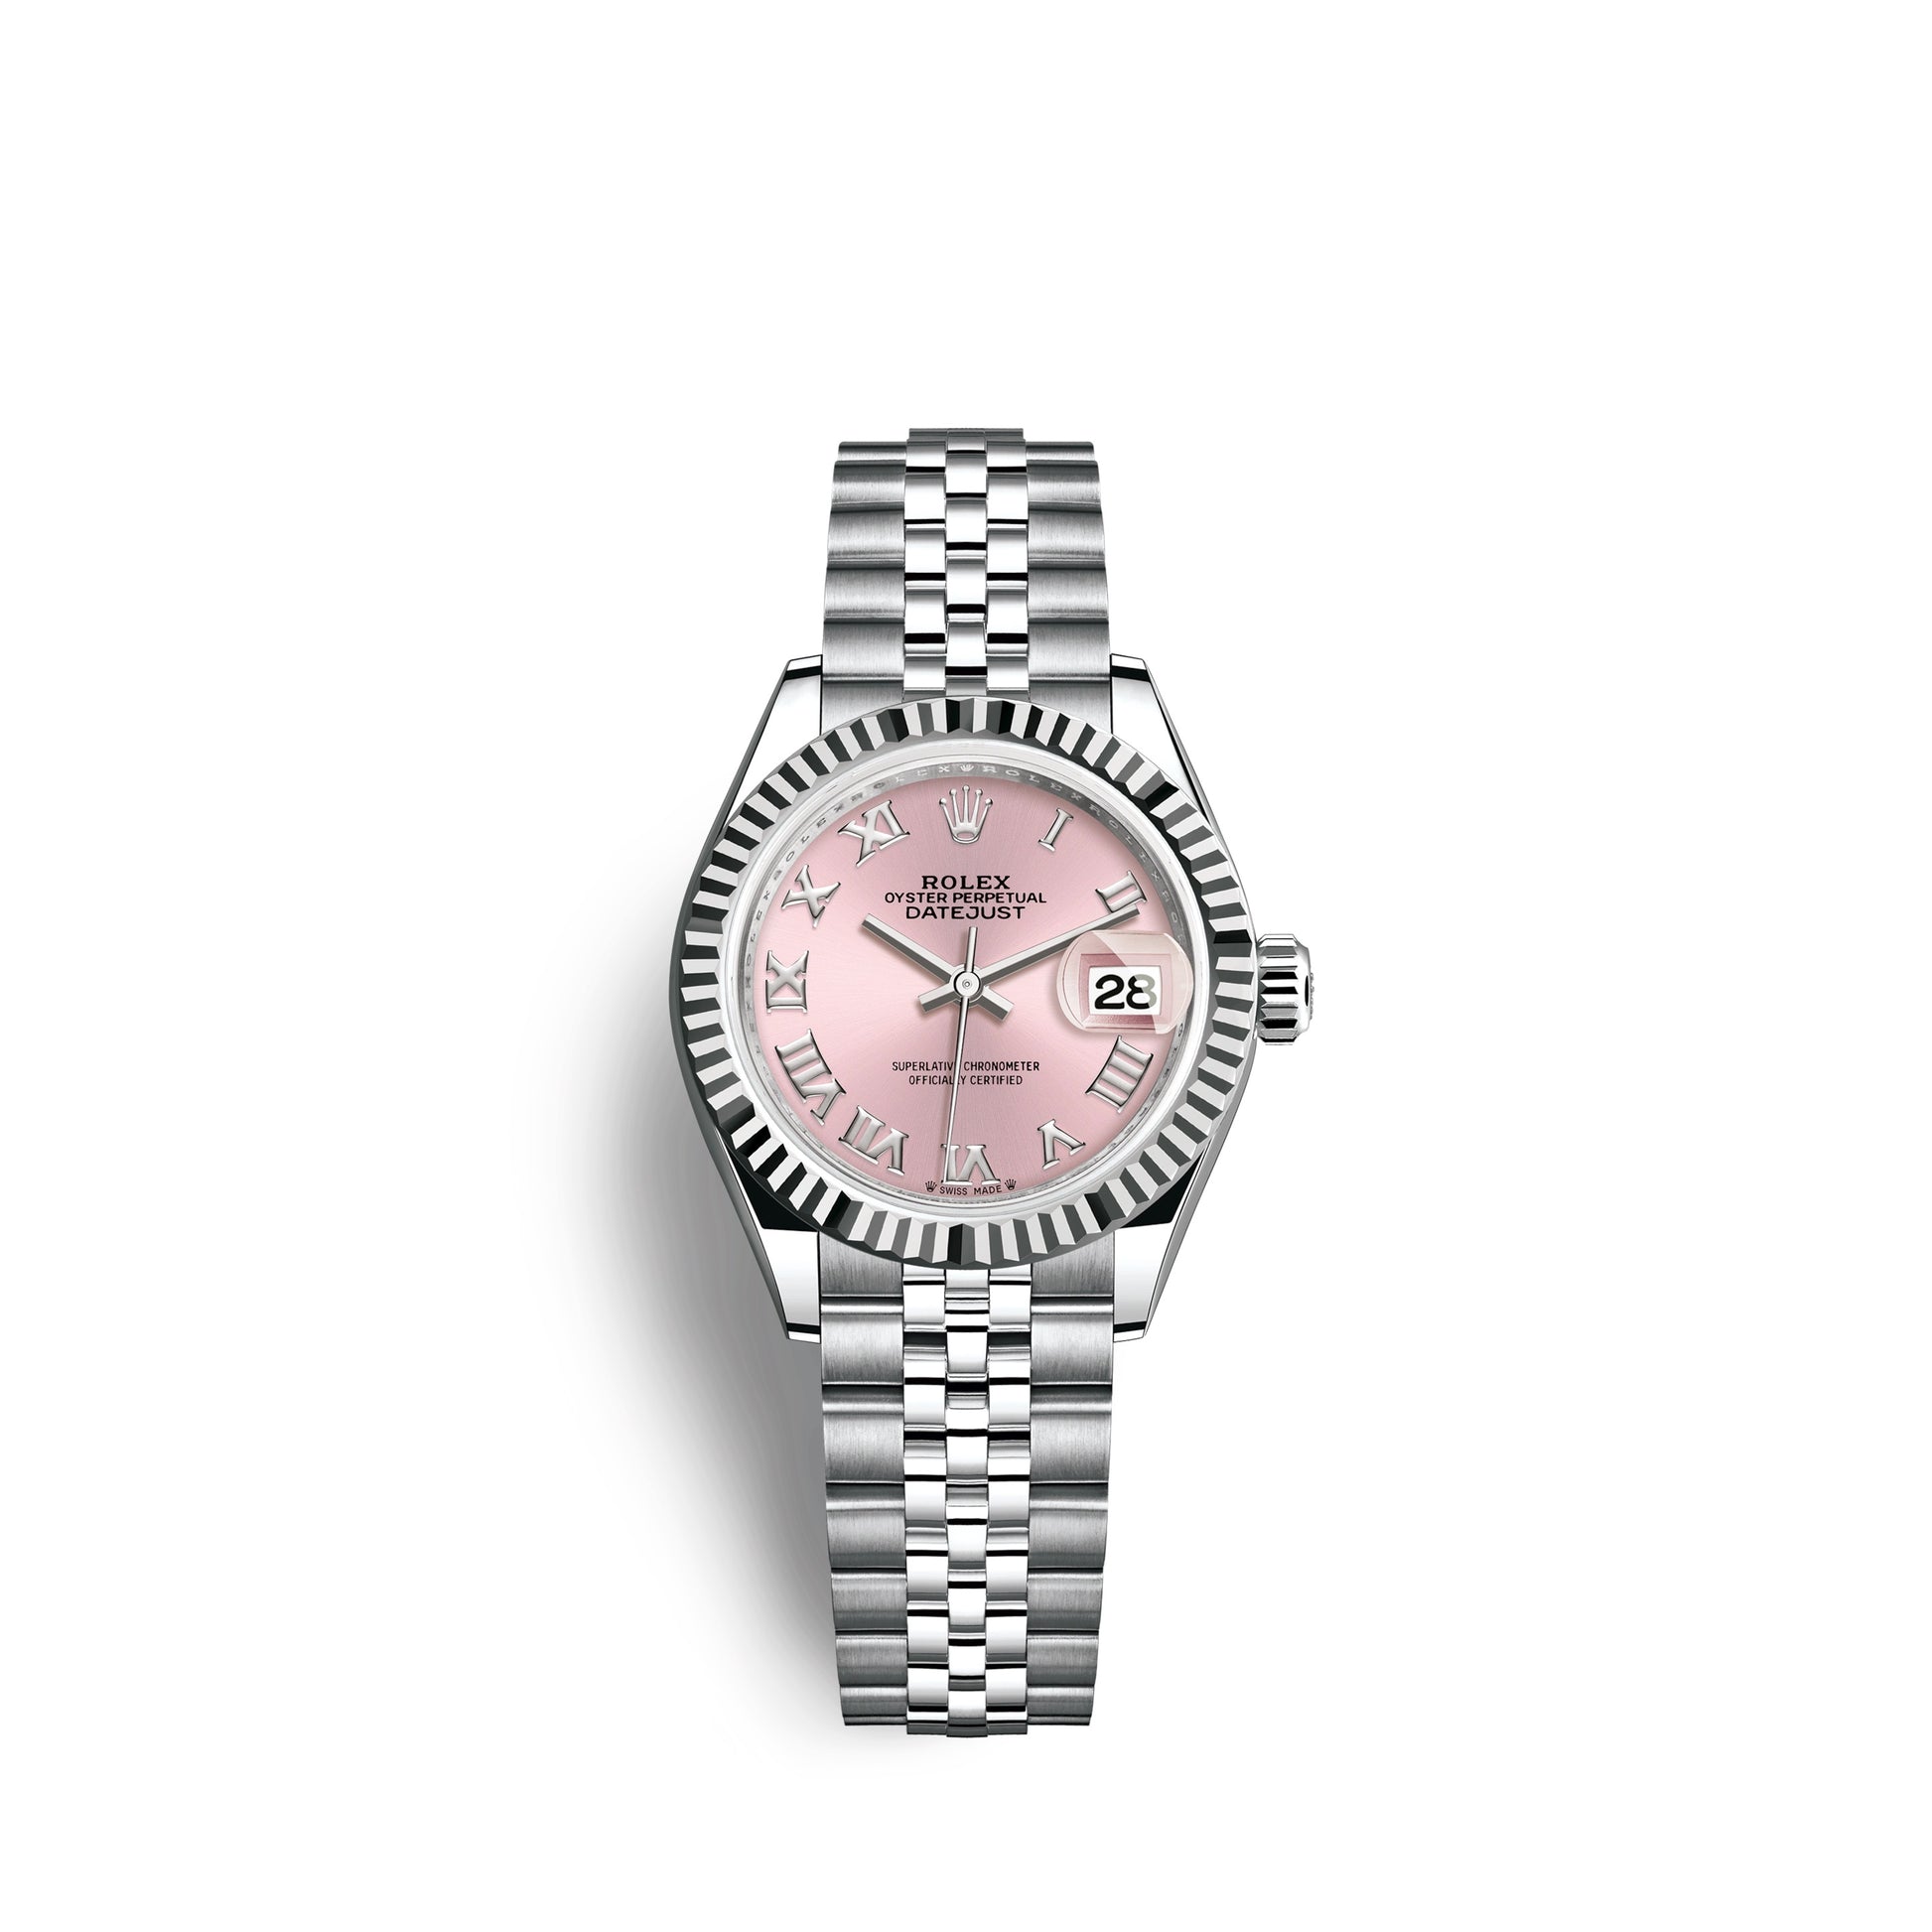 Rolex Lady-Datejust 28, Oystersteel and 18k White Gold, Ref# 279174-0017